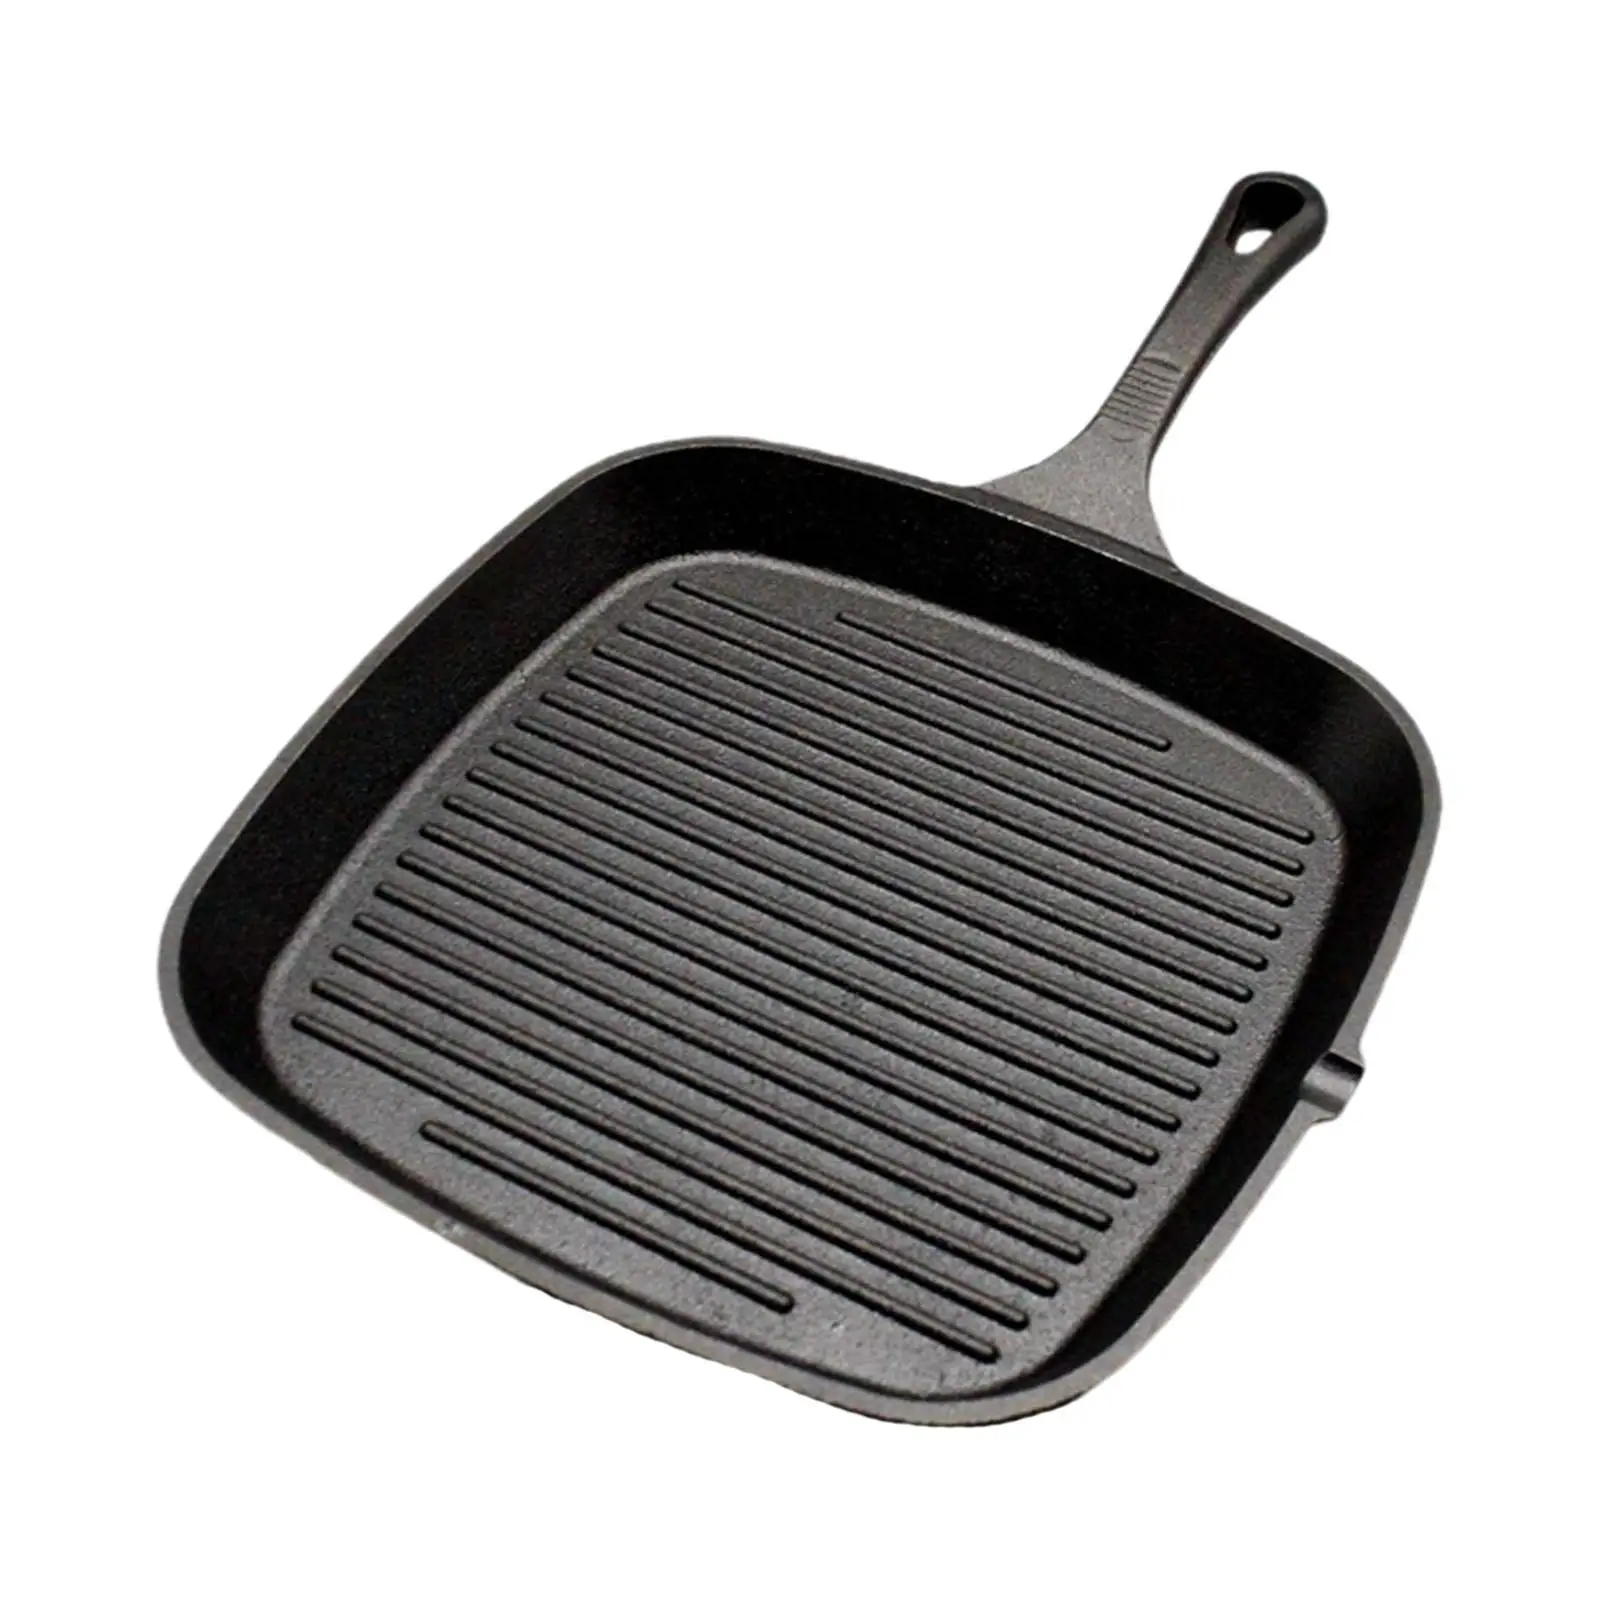 Grill Pans Stove Top Teppanyaki Supplies Square Cooking Frying Pan Griddle Steak Pans for Barbecue Indoor Camping Home